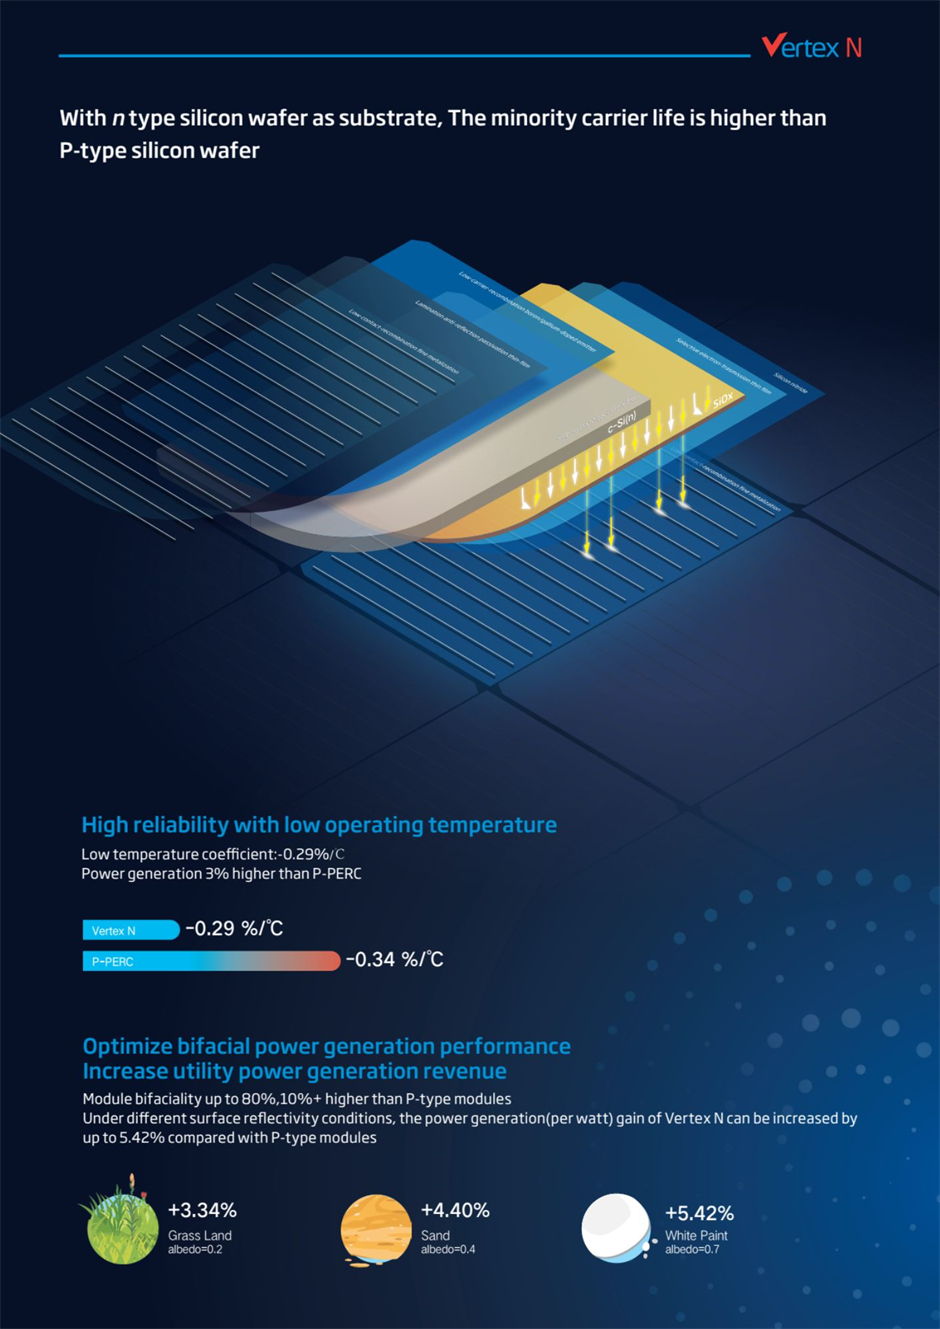 Trinasolar Vertex N 625W n-type i-TOPCon bifacial solar panel delivers high reliability with a low operating temperature, and optimizes bifacial power generation performance, increasing utility power generation revenue. 
 